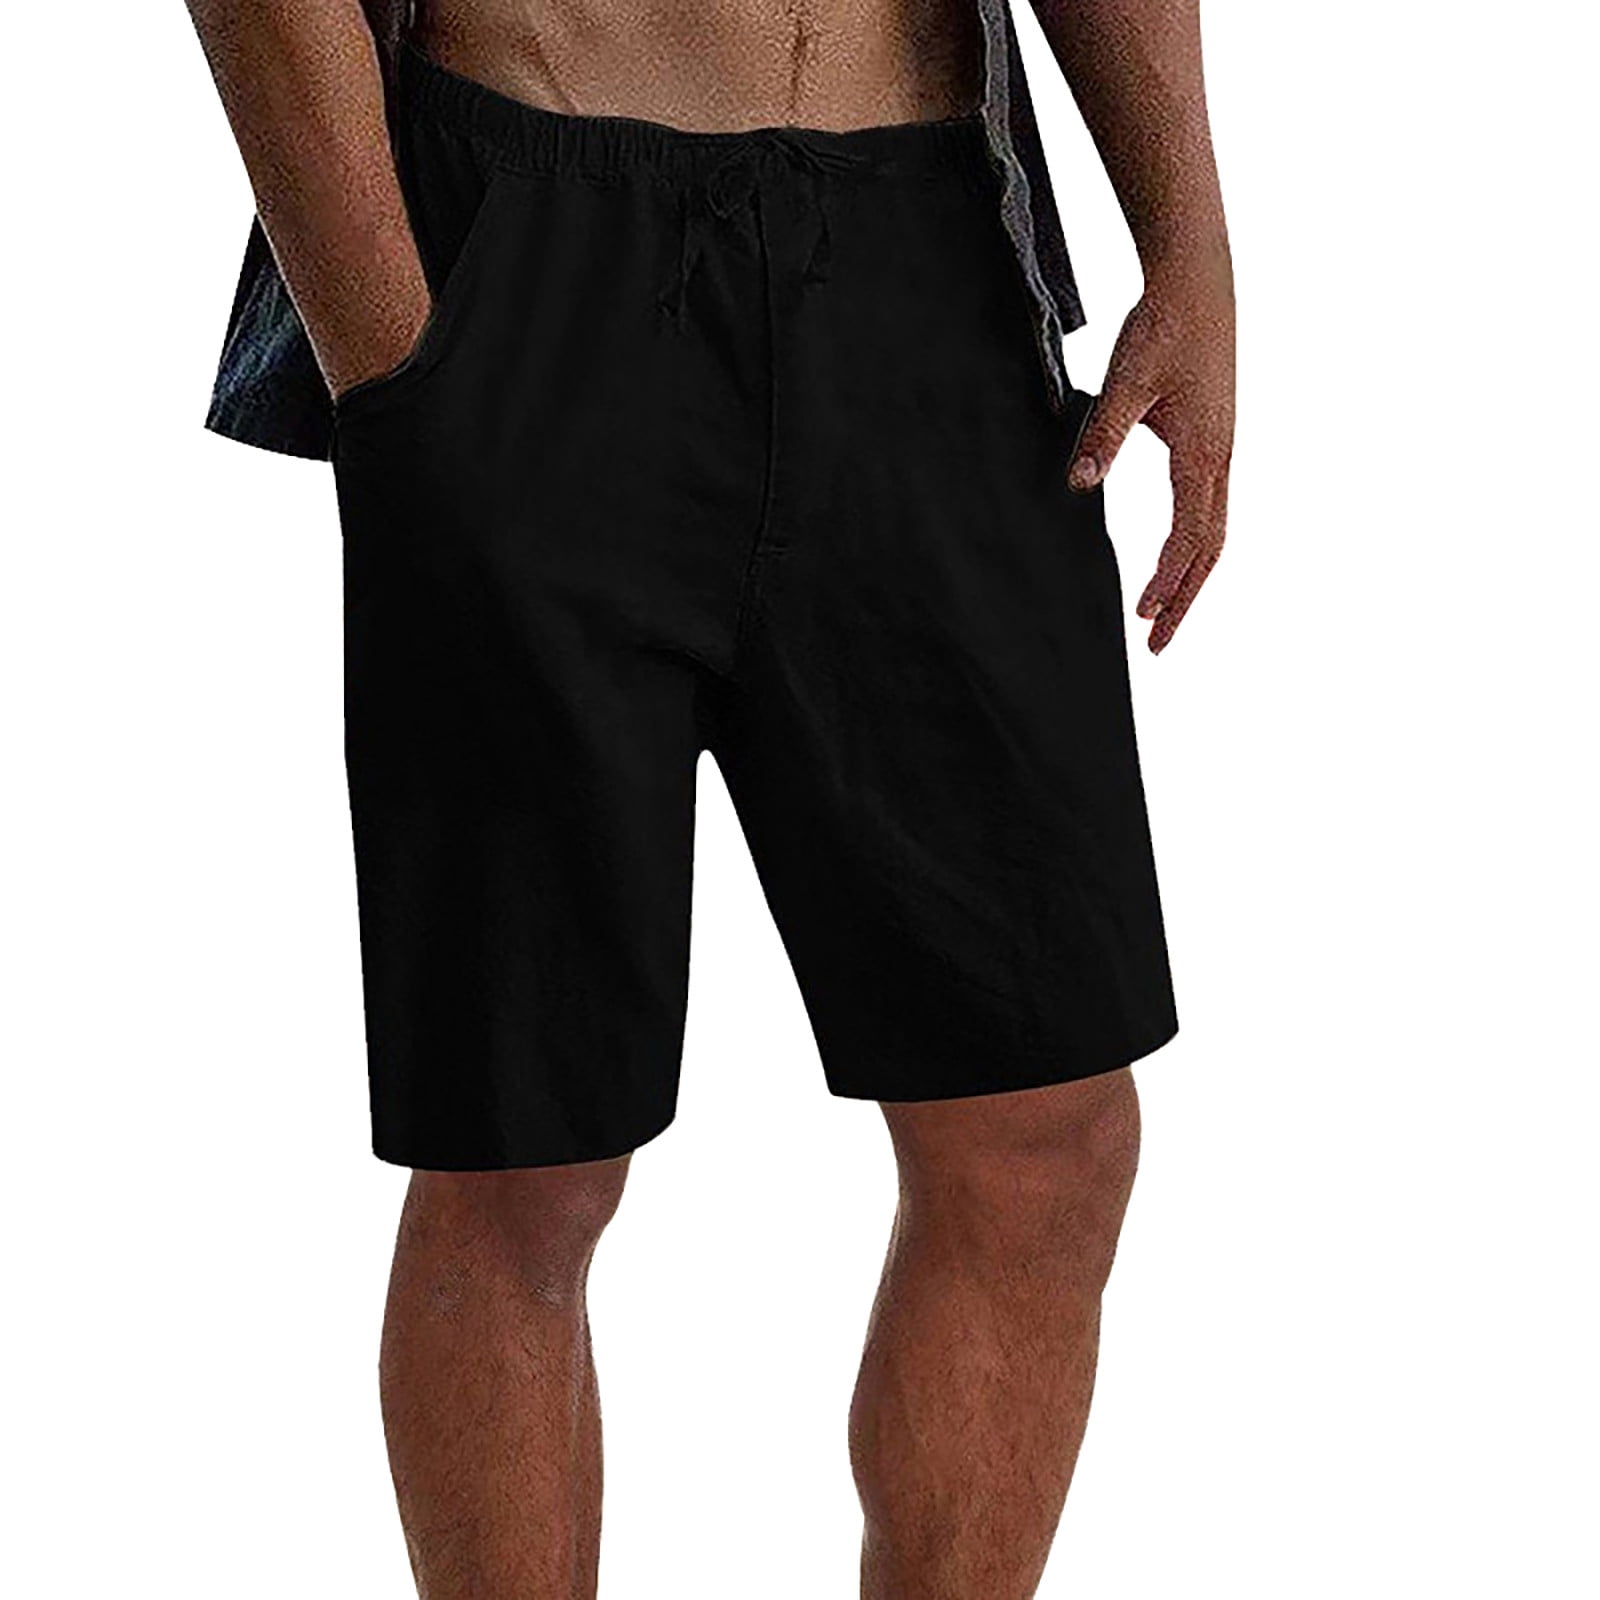 Shorts for Men Summer Solid Color Drawstring Trouser Pocket Lightweight  Short Inseam Running Gym Elastic High Waisted Shorts with Pockets